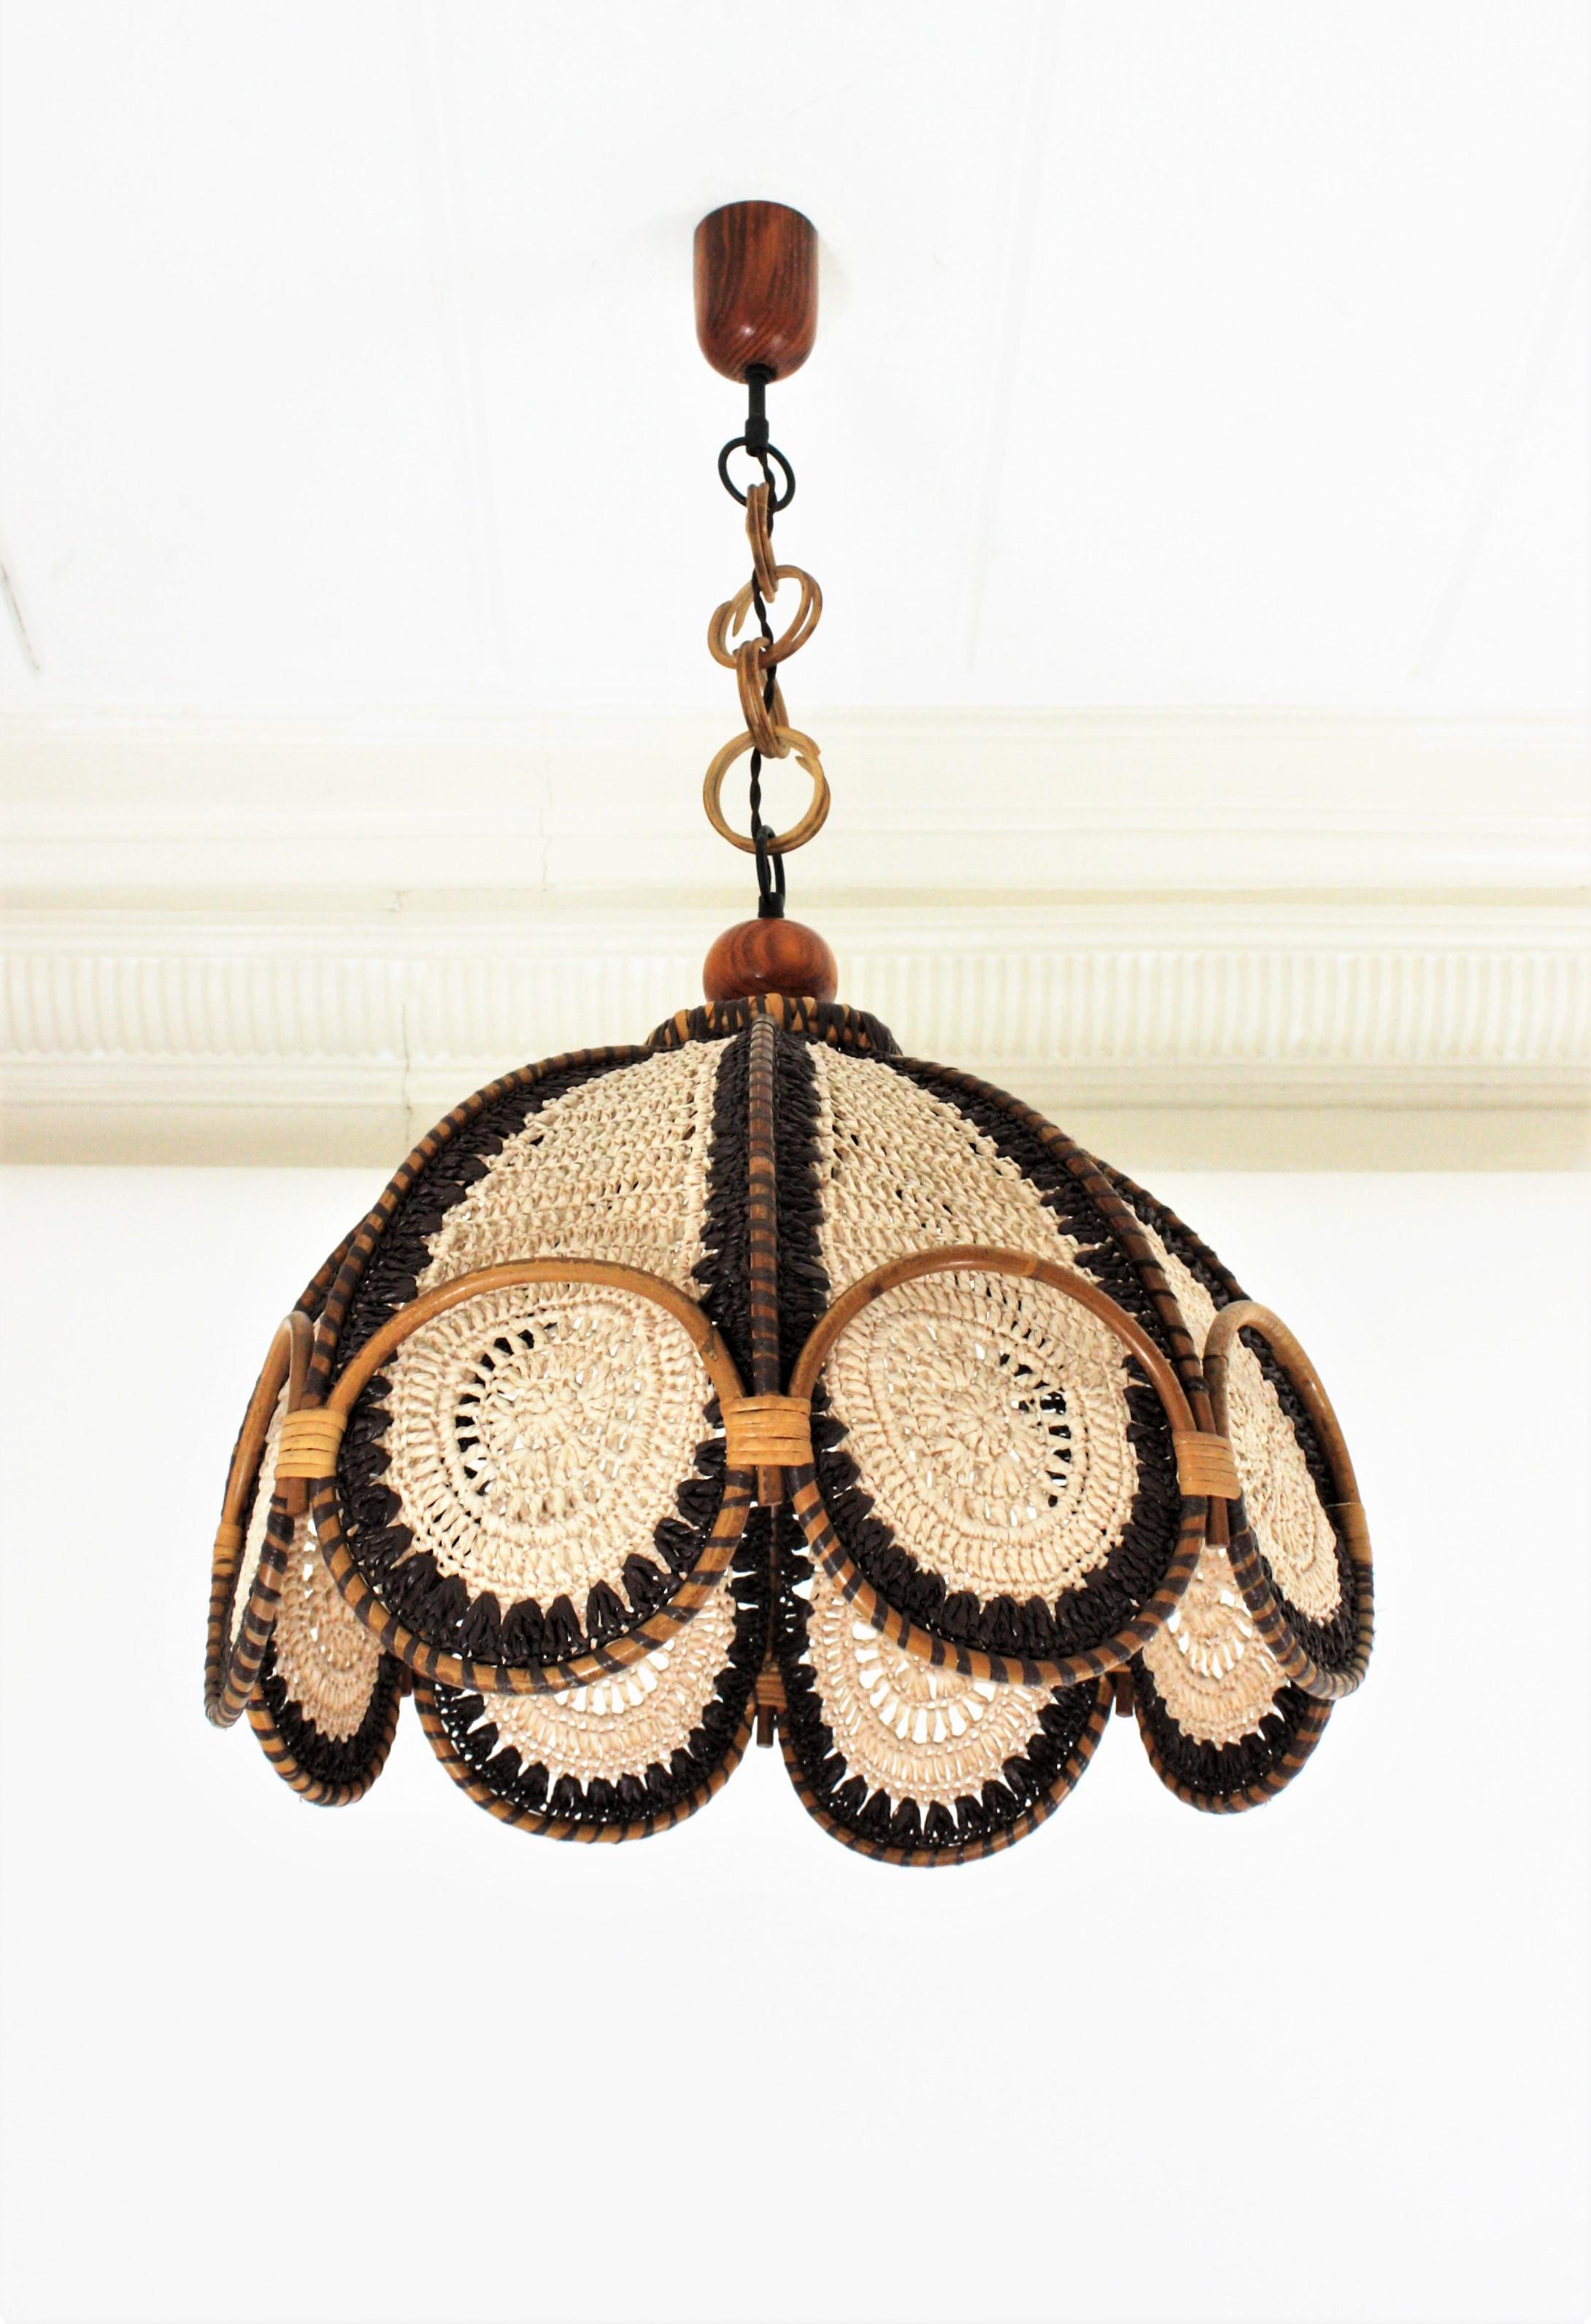 Bohemian Spanish Modernist Beige Brown Macramé Large Pendant Lamp with Rattan Rings For Sale